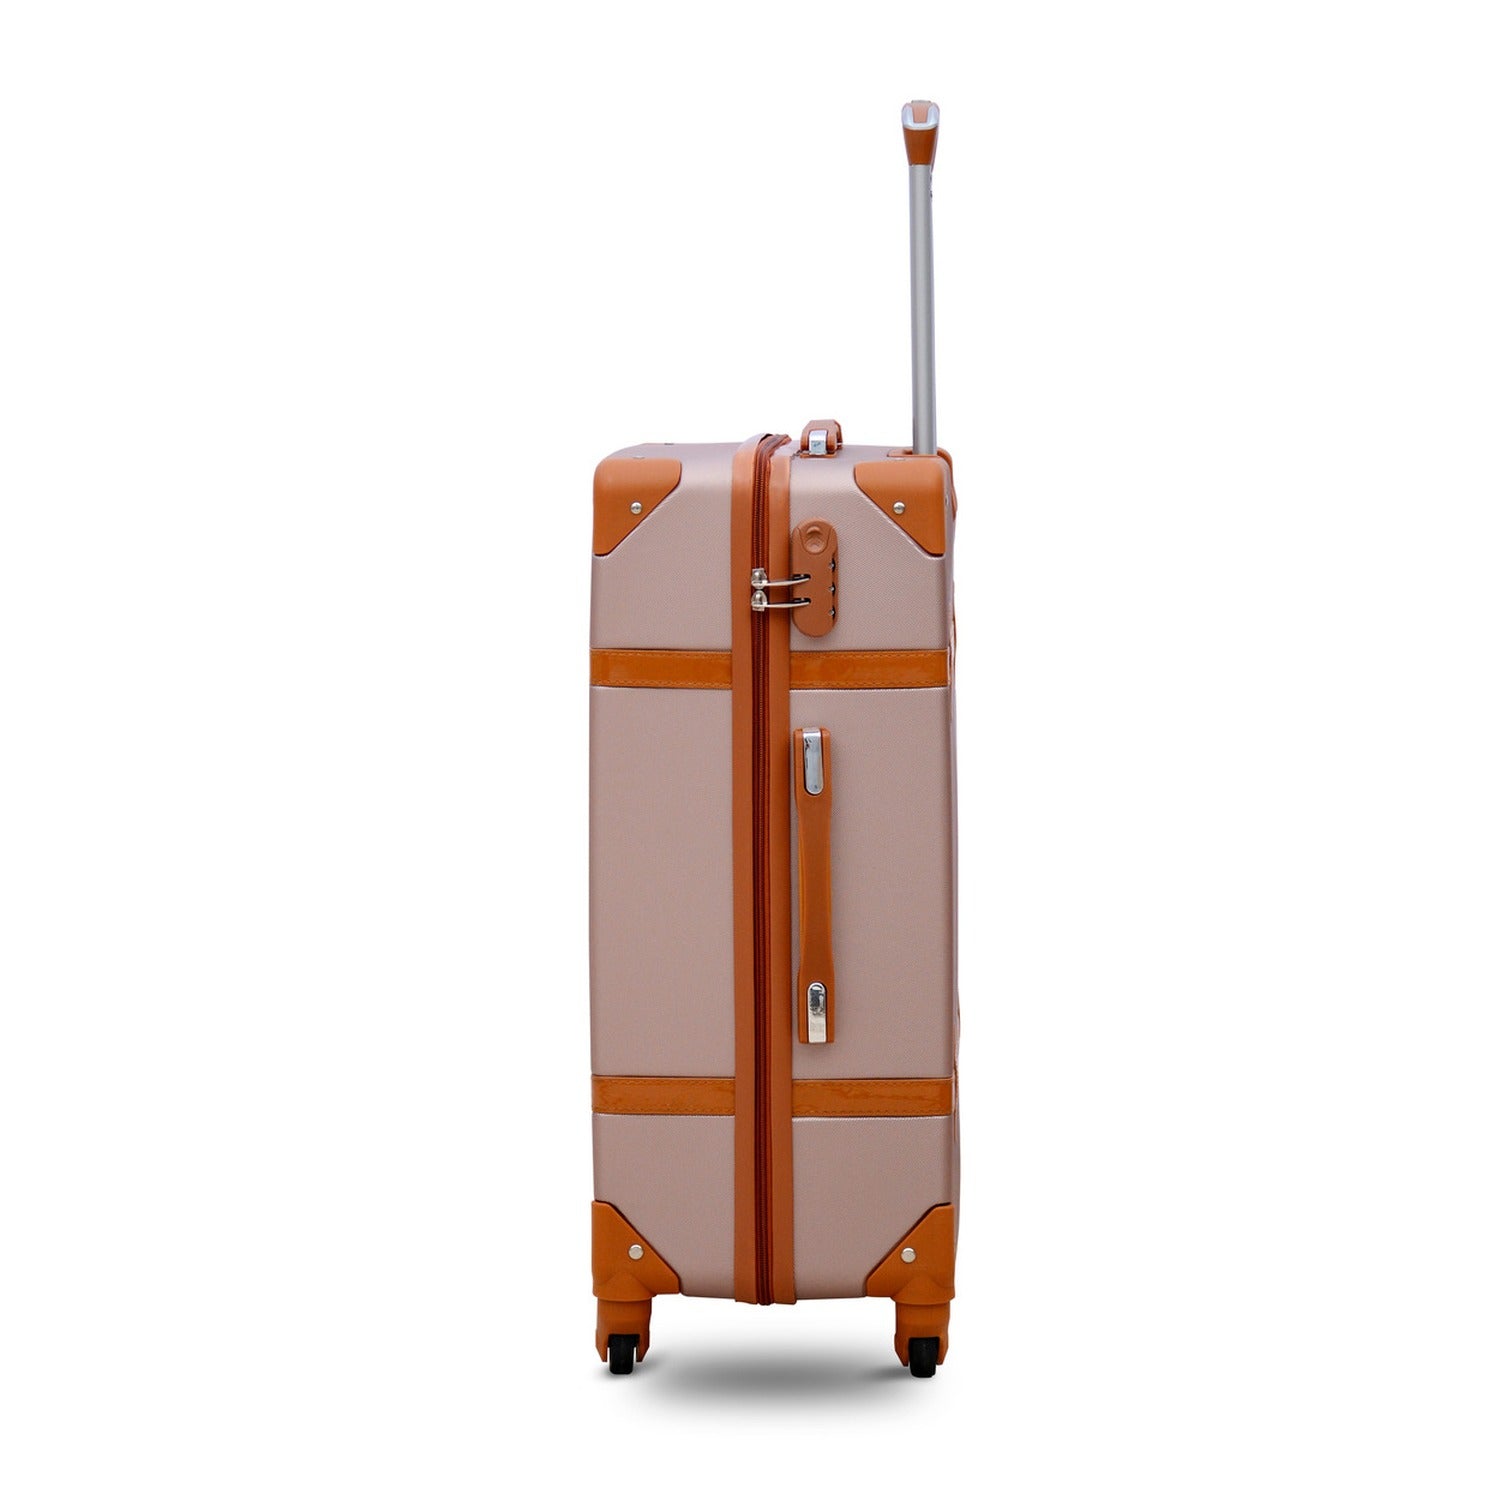 24" Corner Guard ABS Lightweight Luggage Bag with Spinner Wheel